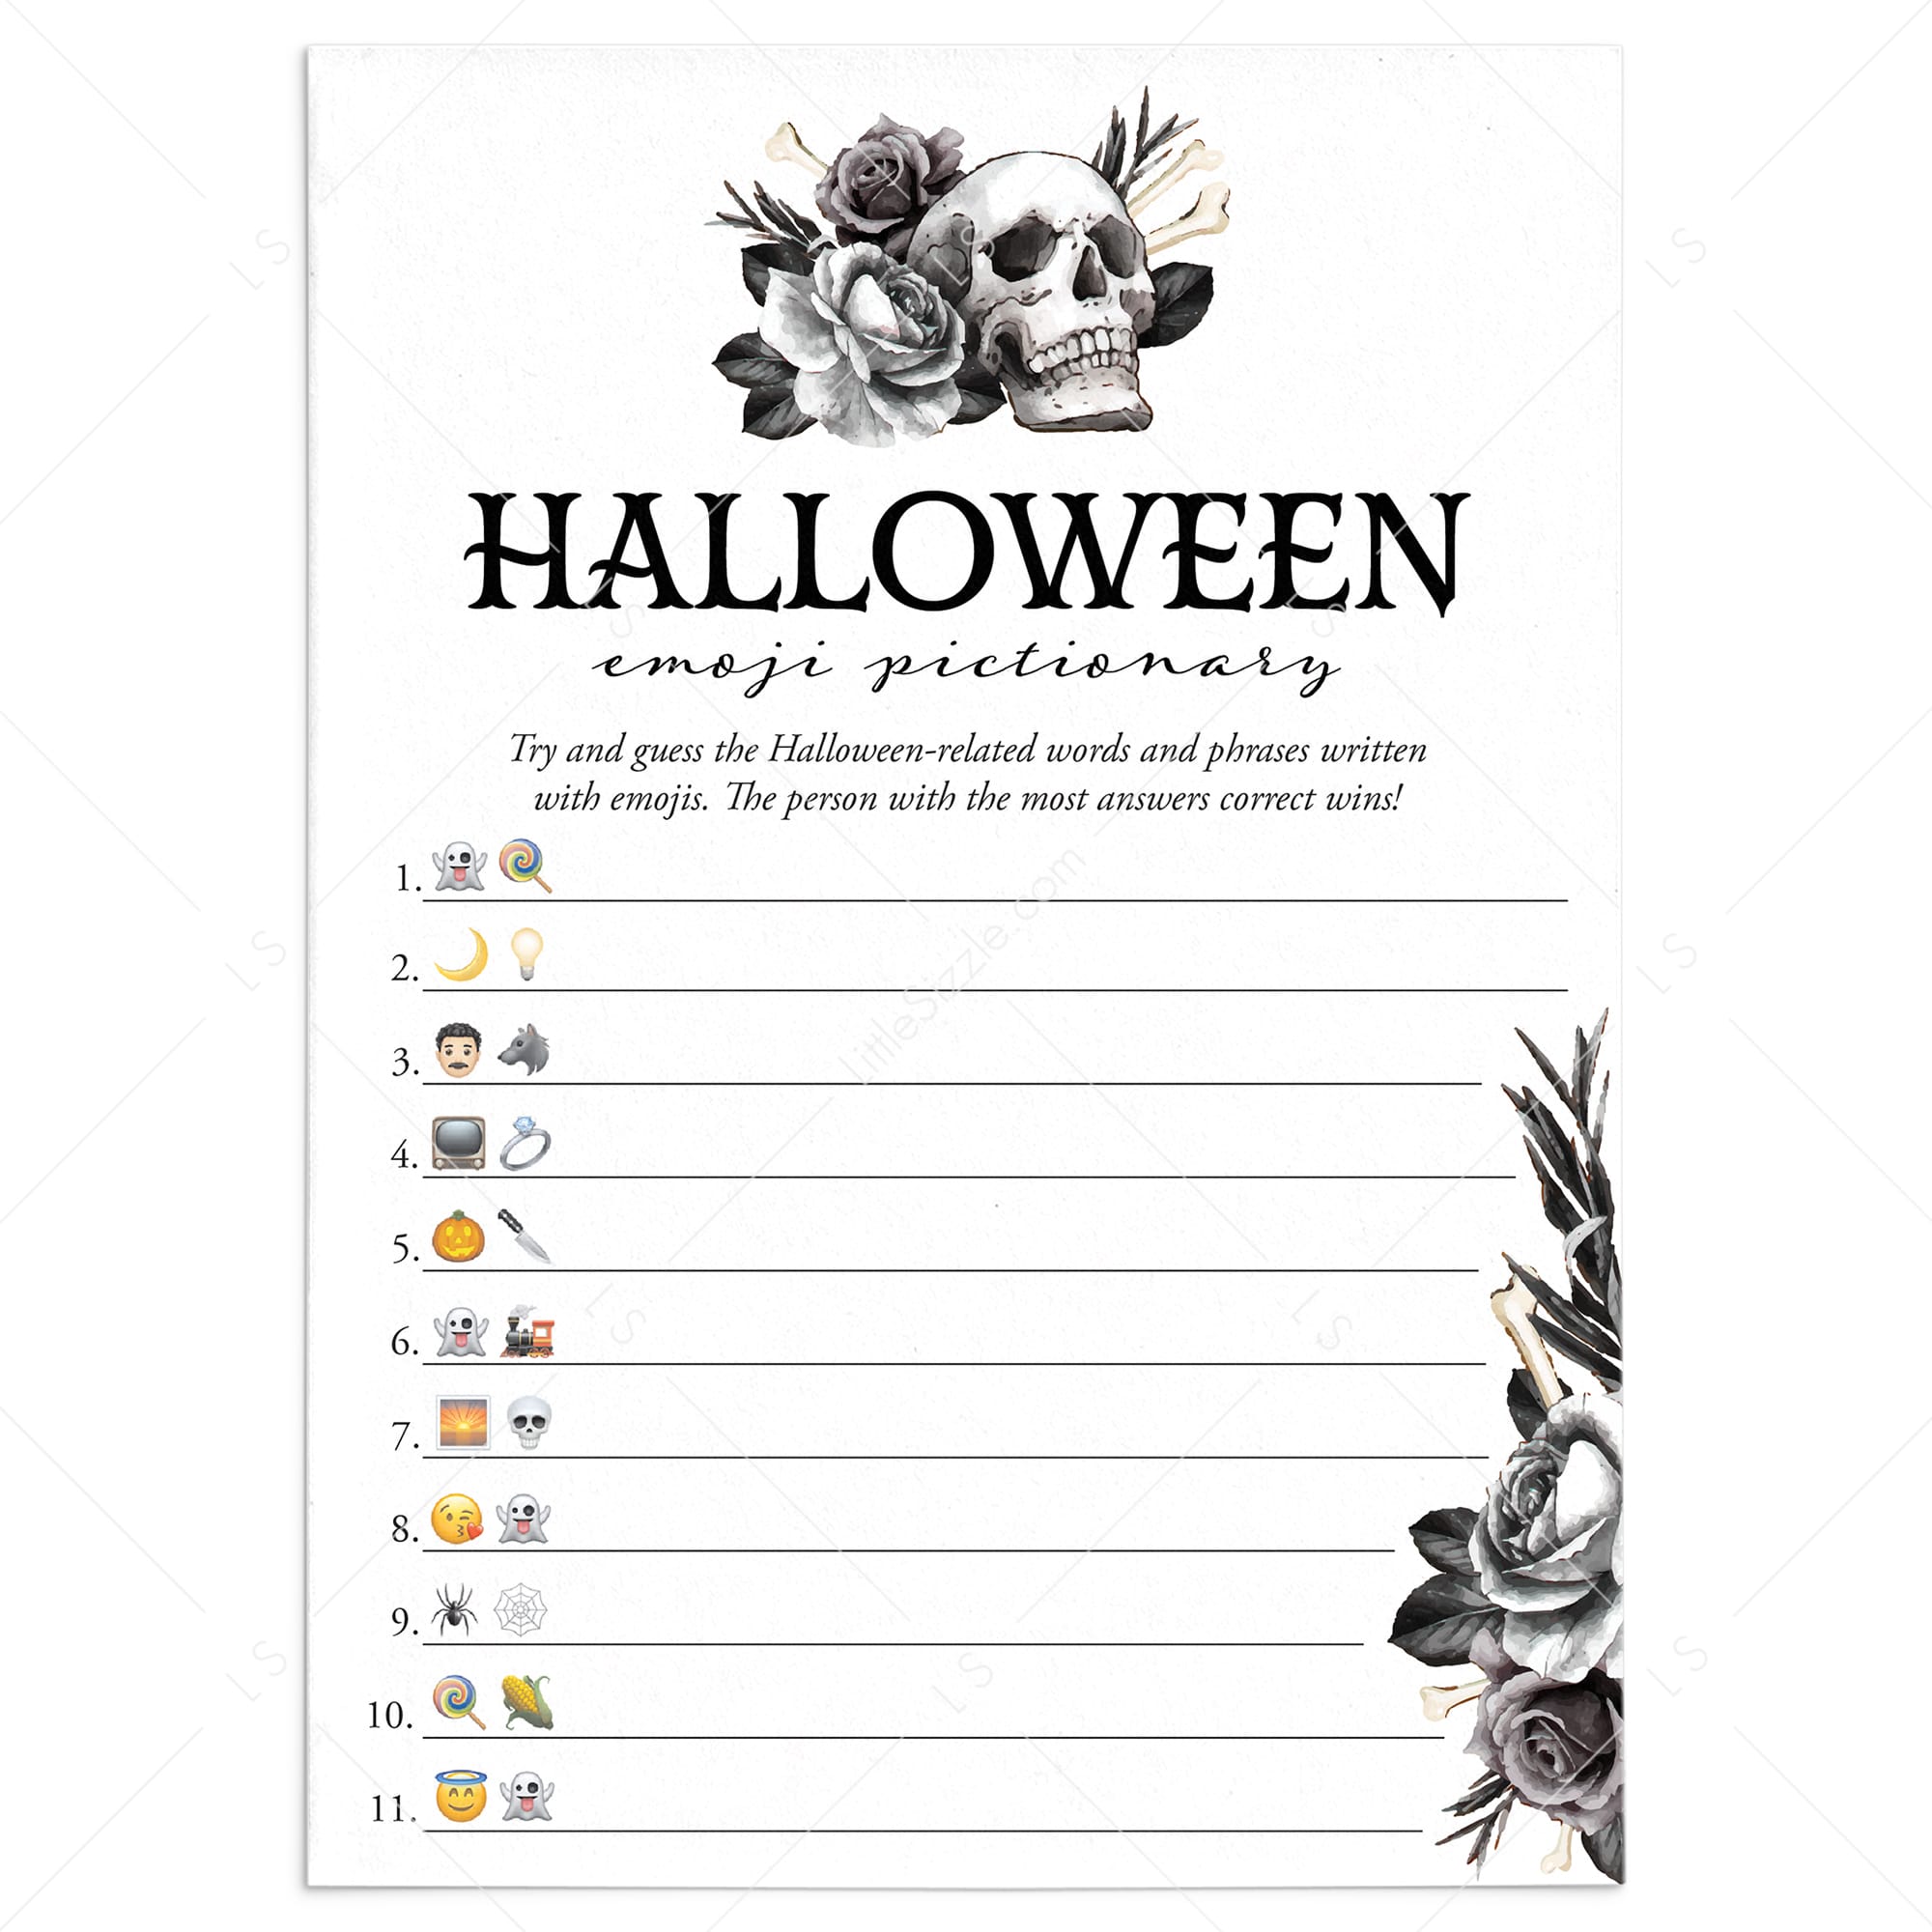 Gothic Halloween Party Game Emoji Pictionary with Answers by LittleSizzle